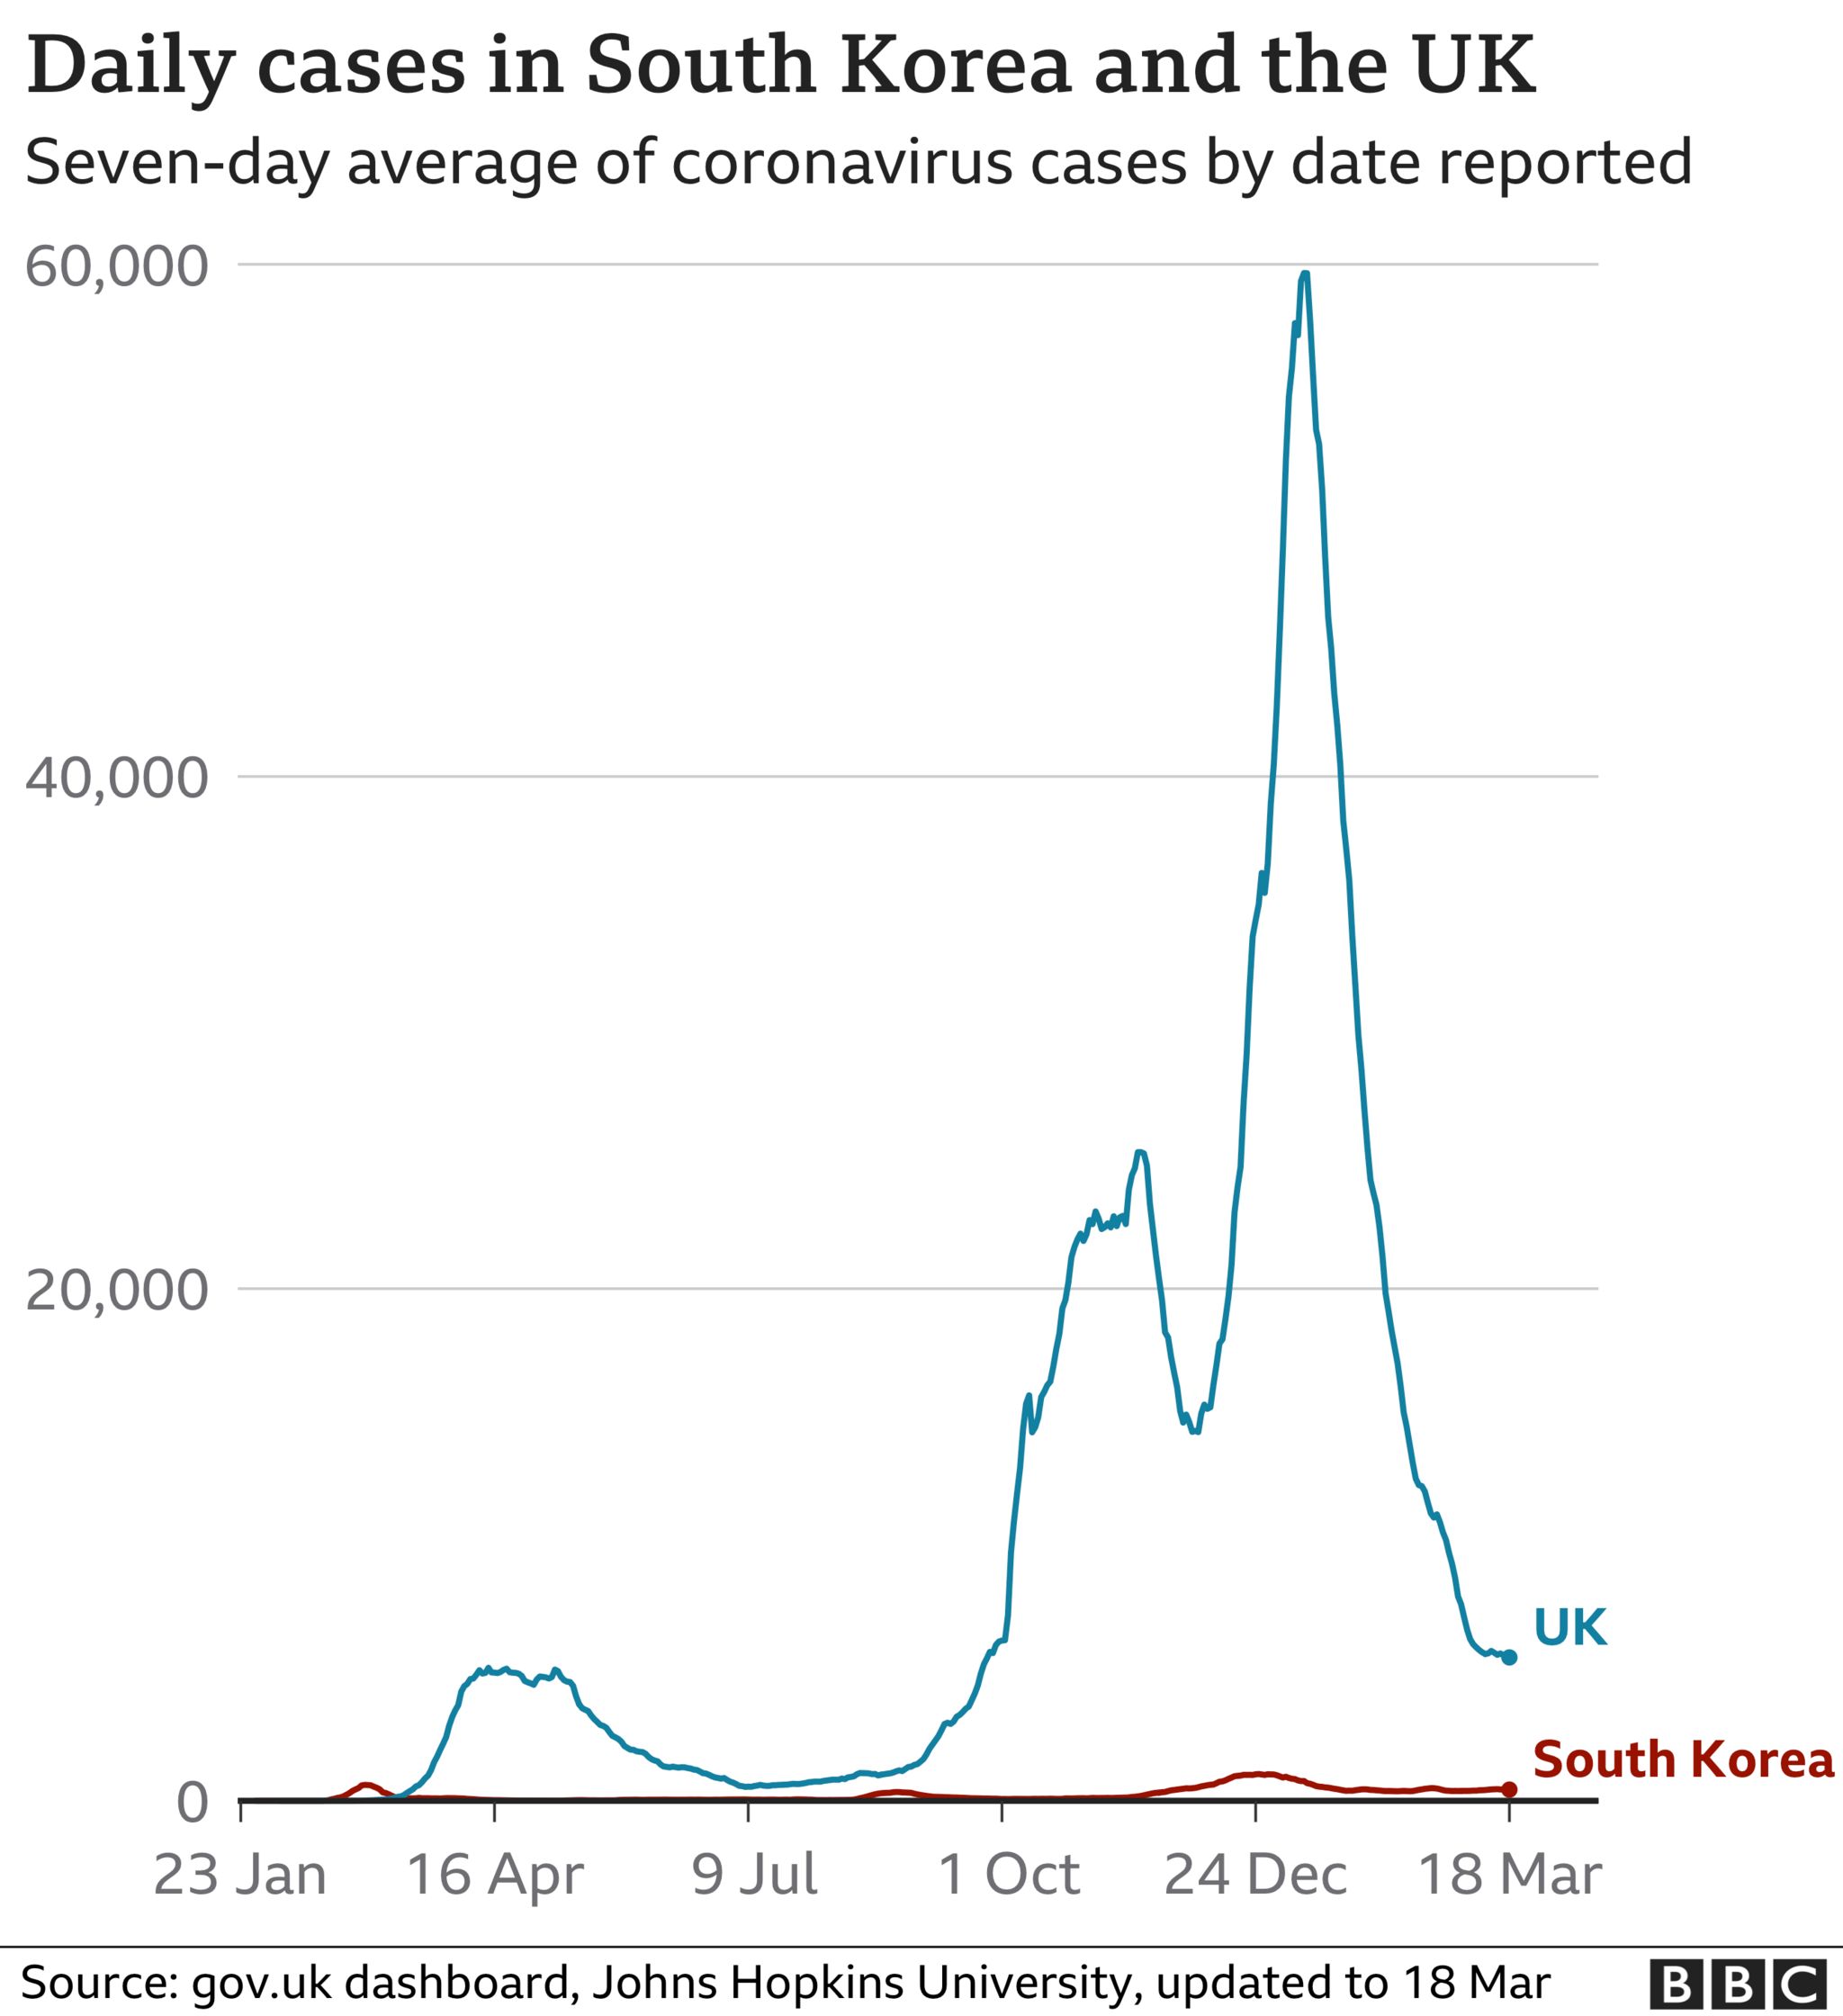 A graph showing daily Covid cases in the UK and in South Korea